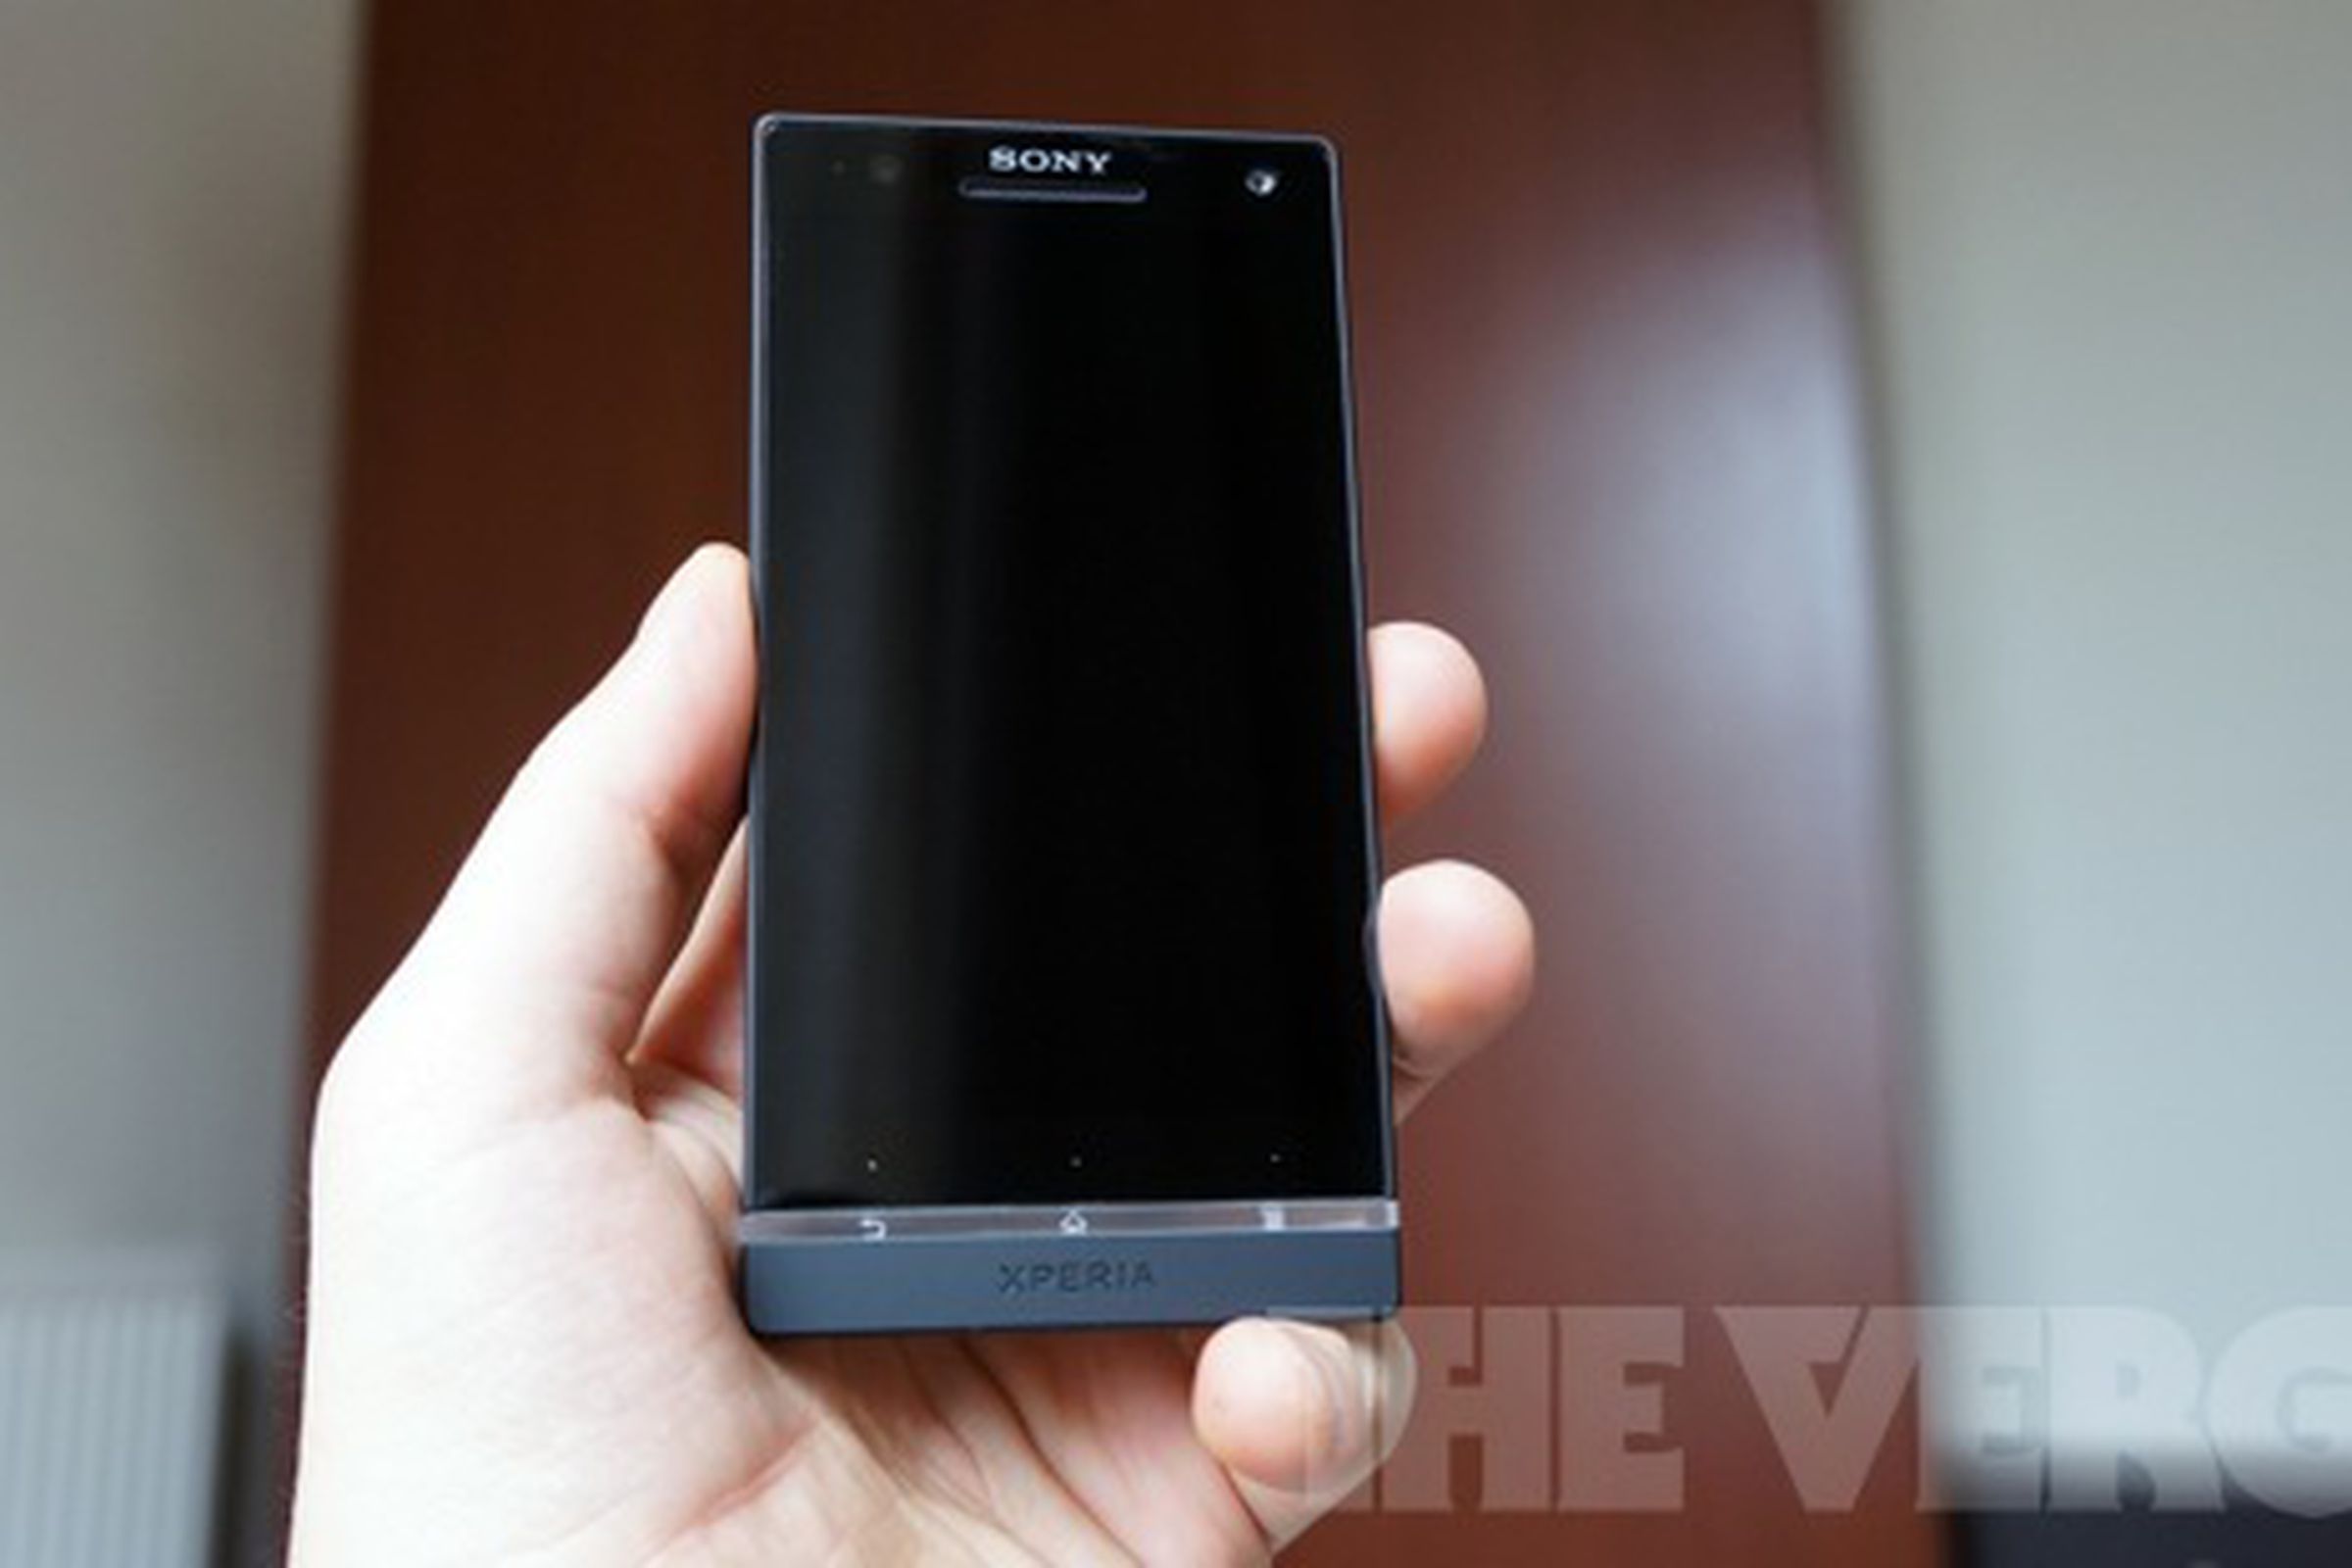 xperia-s-review-500